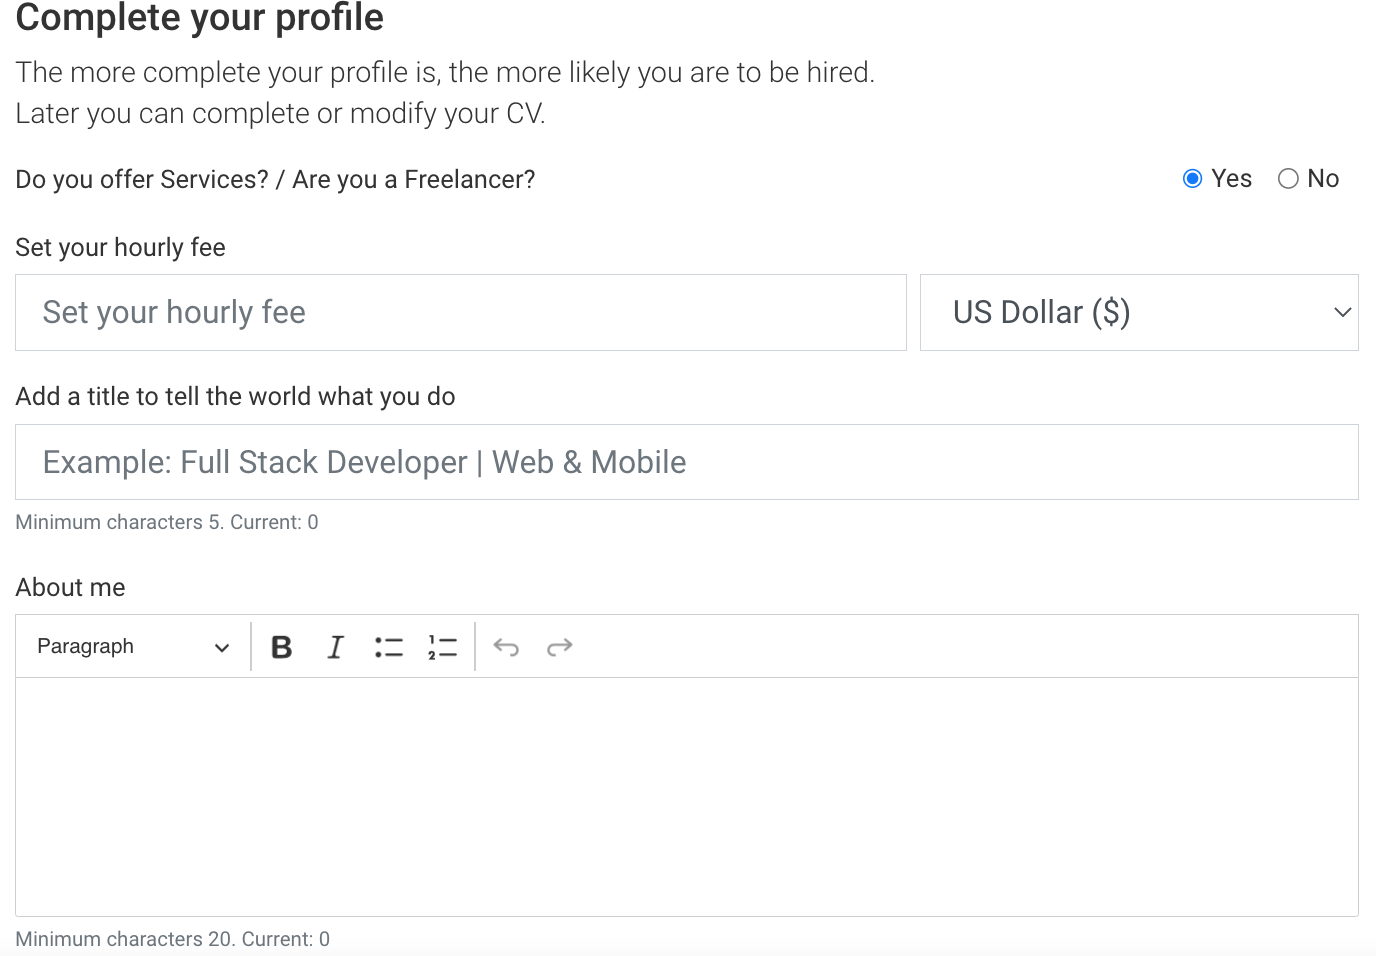 Complete your profile

The more complete your profile is, the more likely you are to be hired
Later you can complete or modify your CV

Do you offer Services? / Are you a Freelancer? ® Yes O No
Set your hourly fee

Set your hourly fee US Dollar (8) v

Add a title to tell the world what you do

Example: Full Stack Developer | Web & Mobile

Minimum characters 5 Current: 0

About me

Paragraph v B I Z = © oo

Minimum characters 20. Current 0